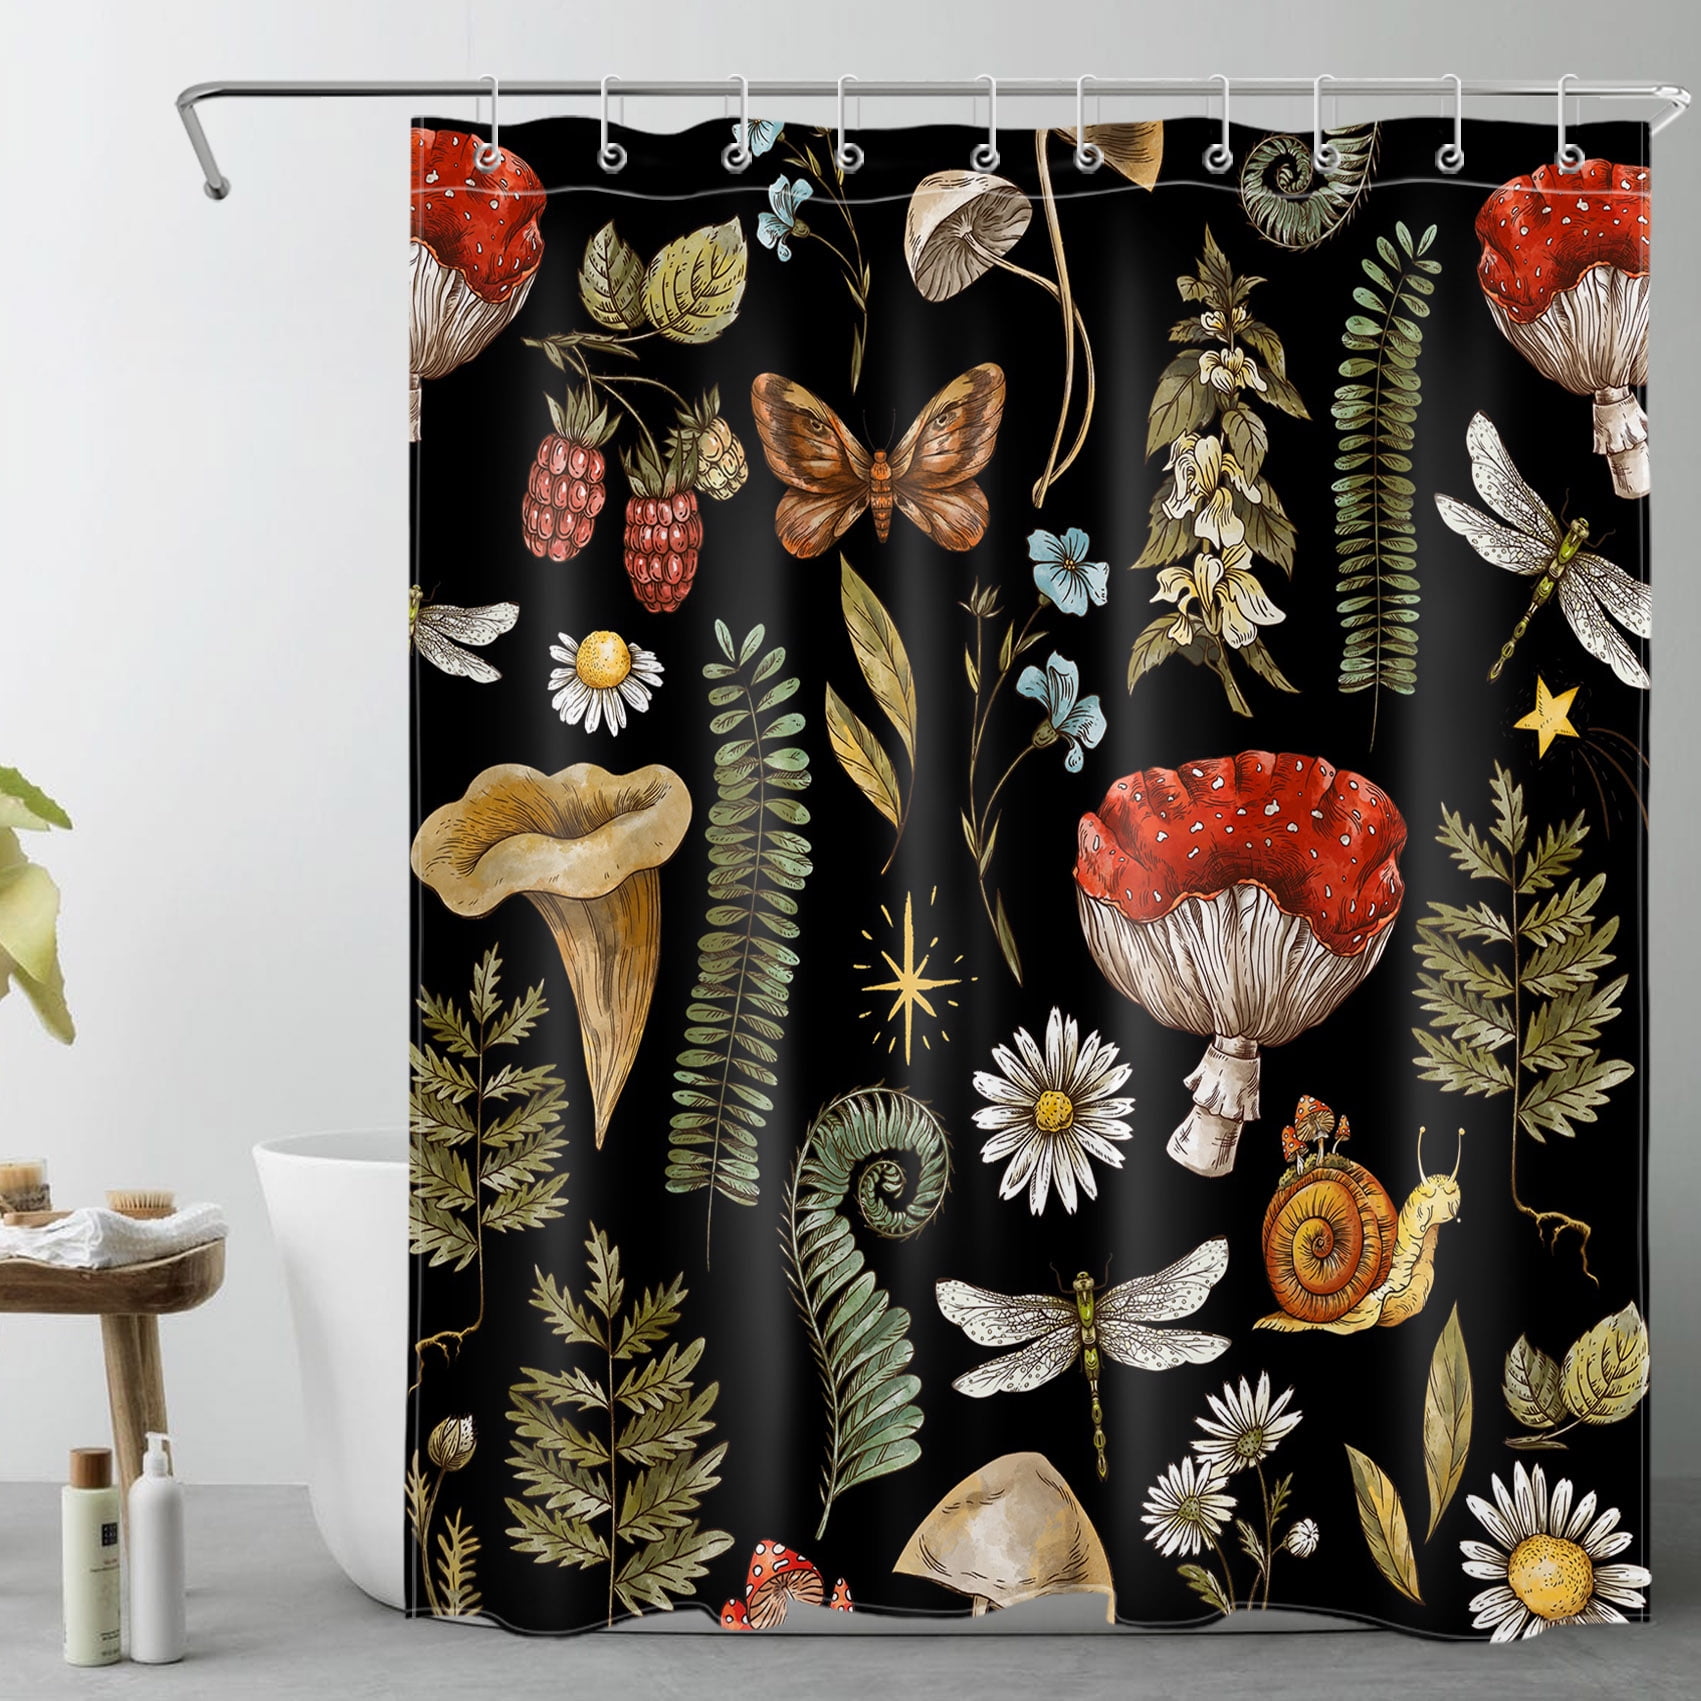 Vintage Red Mushroom Shower Curtain Decor,Rustic Green Leaf Plant and ...